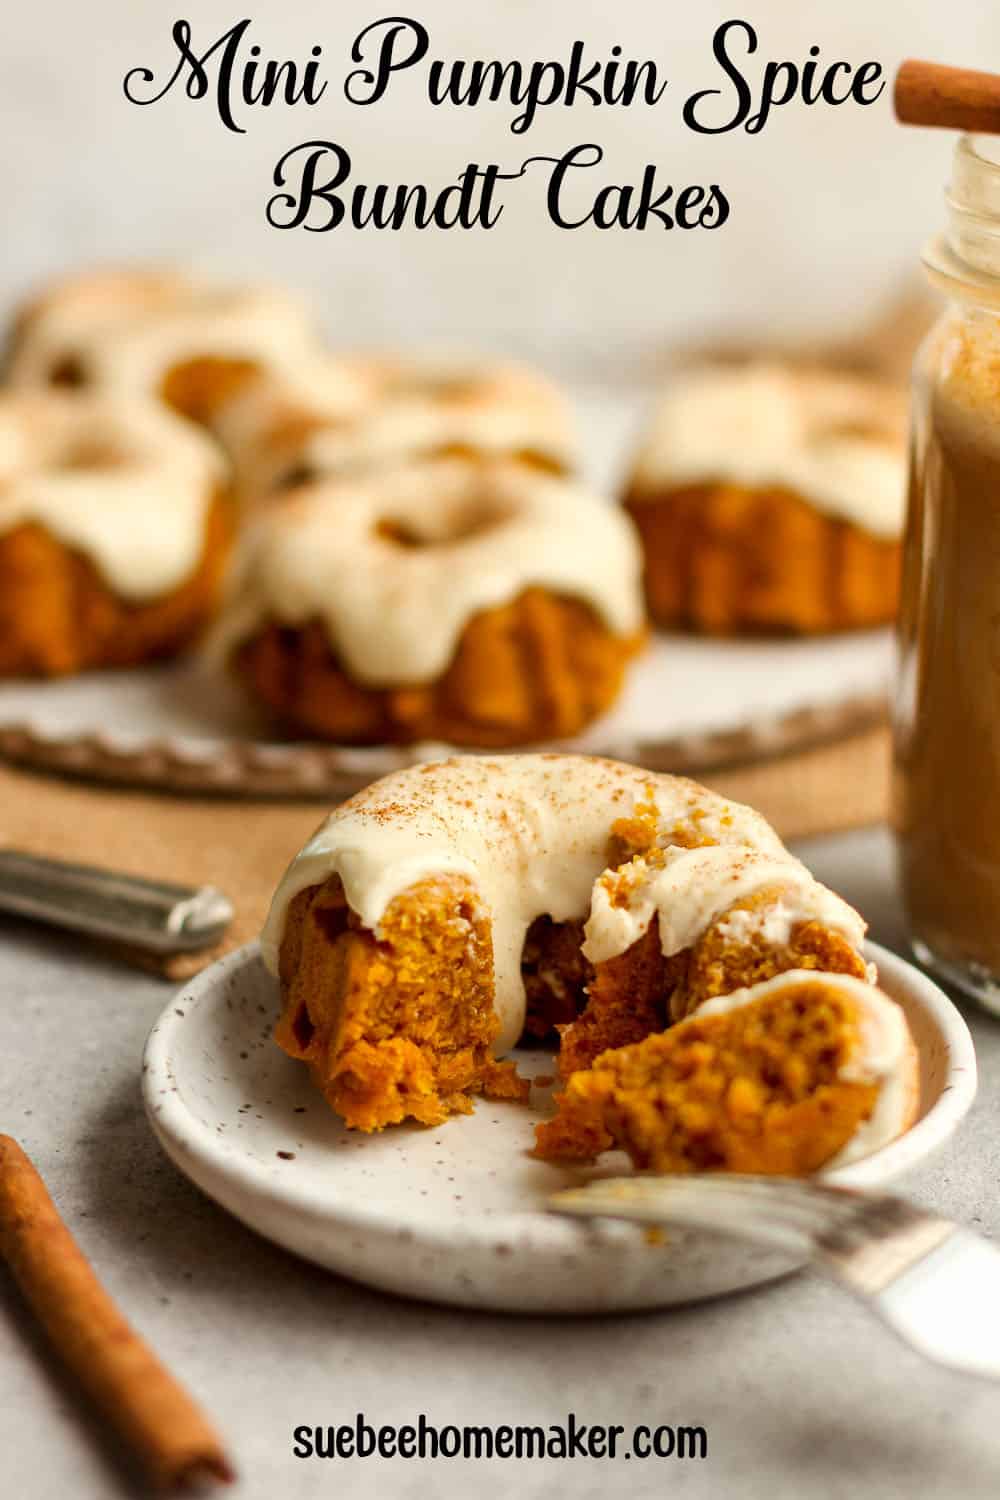 Side view of a mini pumpkin spice bundt cake, with a plate of cakes in the background.